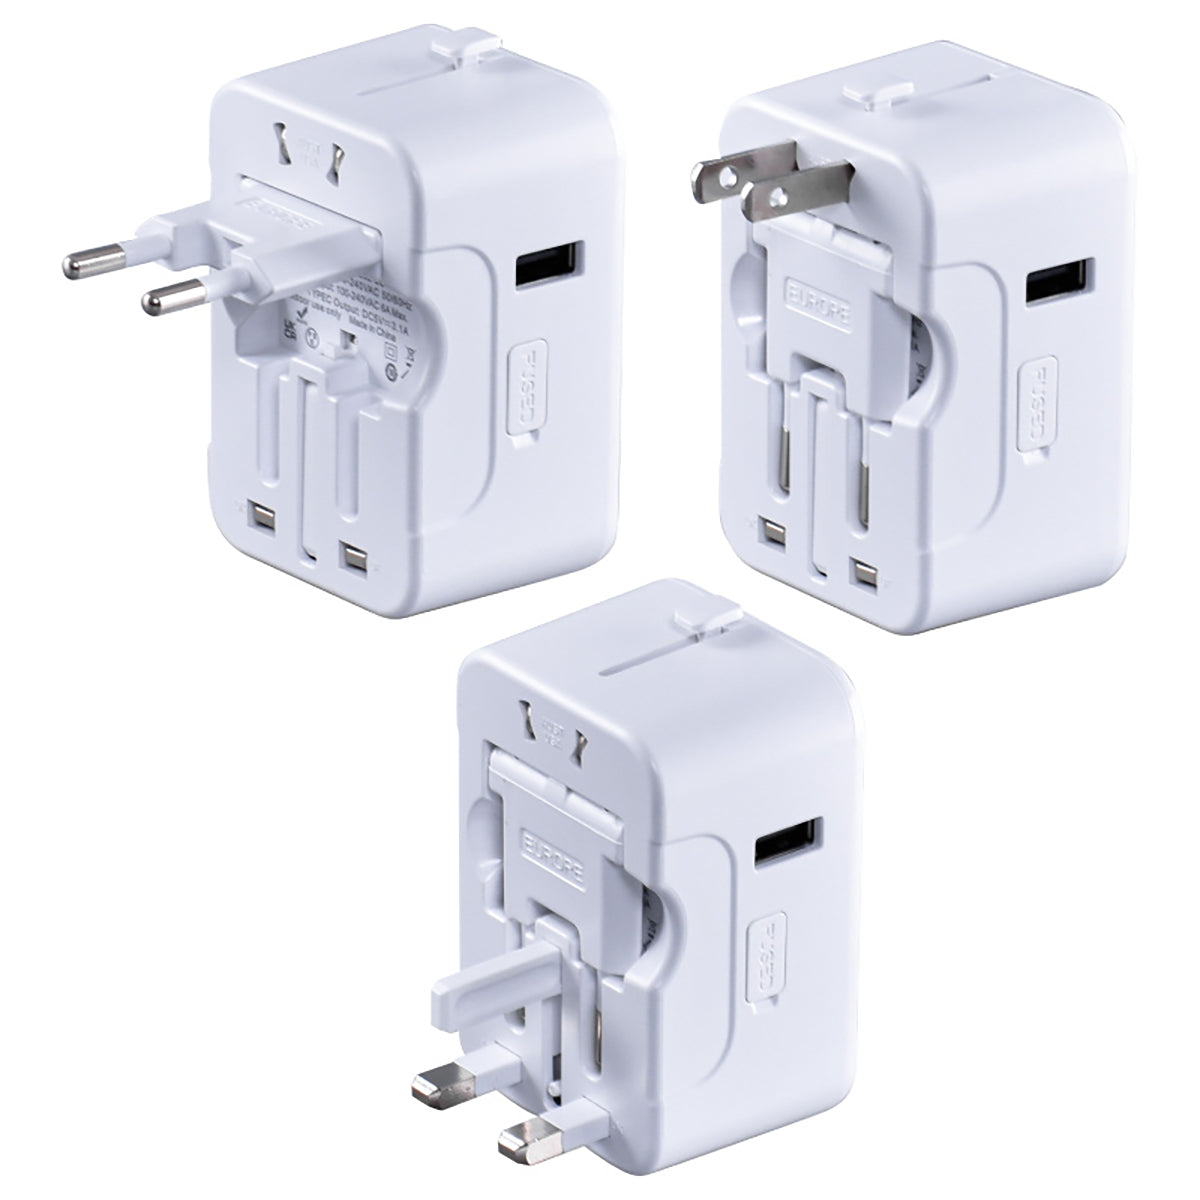 Copy of Multi Adapter | Travel Adapter With 1x USB + 2xType-C Charger | US UK EU AU Adapter (PP7970) Black